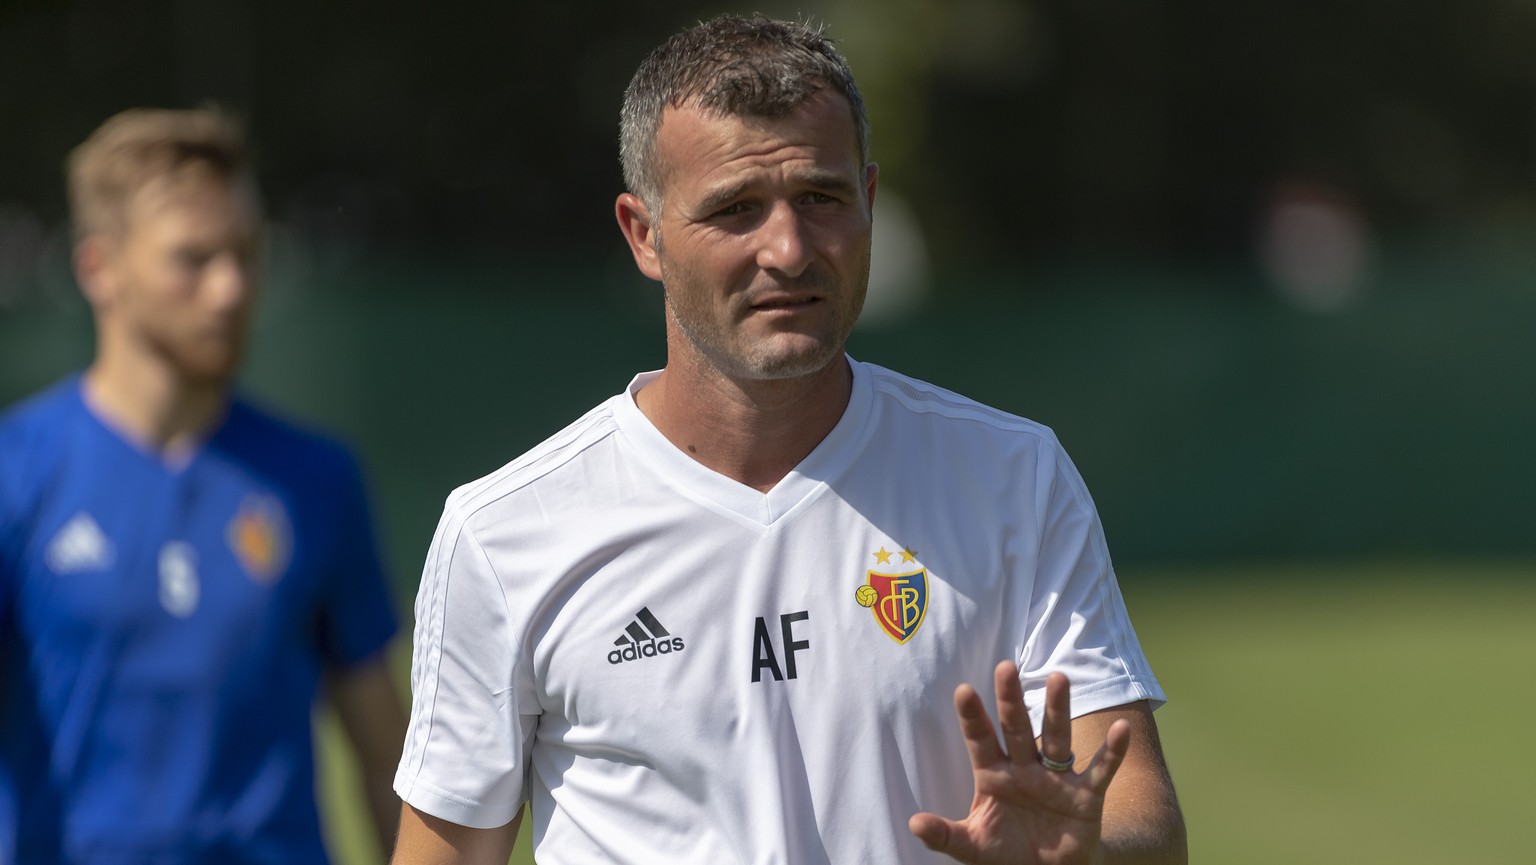 ARCHIVBILD ZUR KEYSTONE-SDA-PREMIUMSTORY UEBER ALEX FREI --- Basel&#039;s temporary head coach Alex Frei during a training session in the St. Jakob-Park training area the day before the UEFA Champions ...